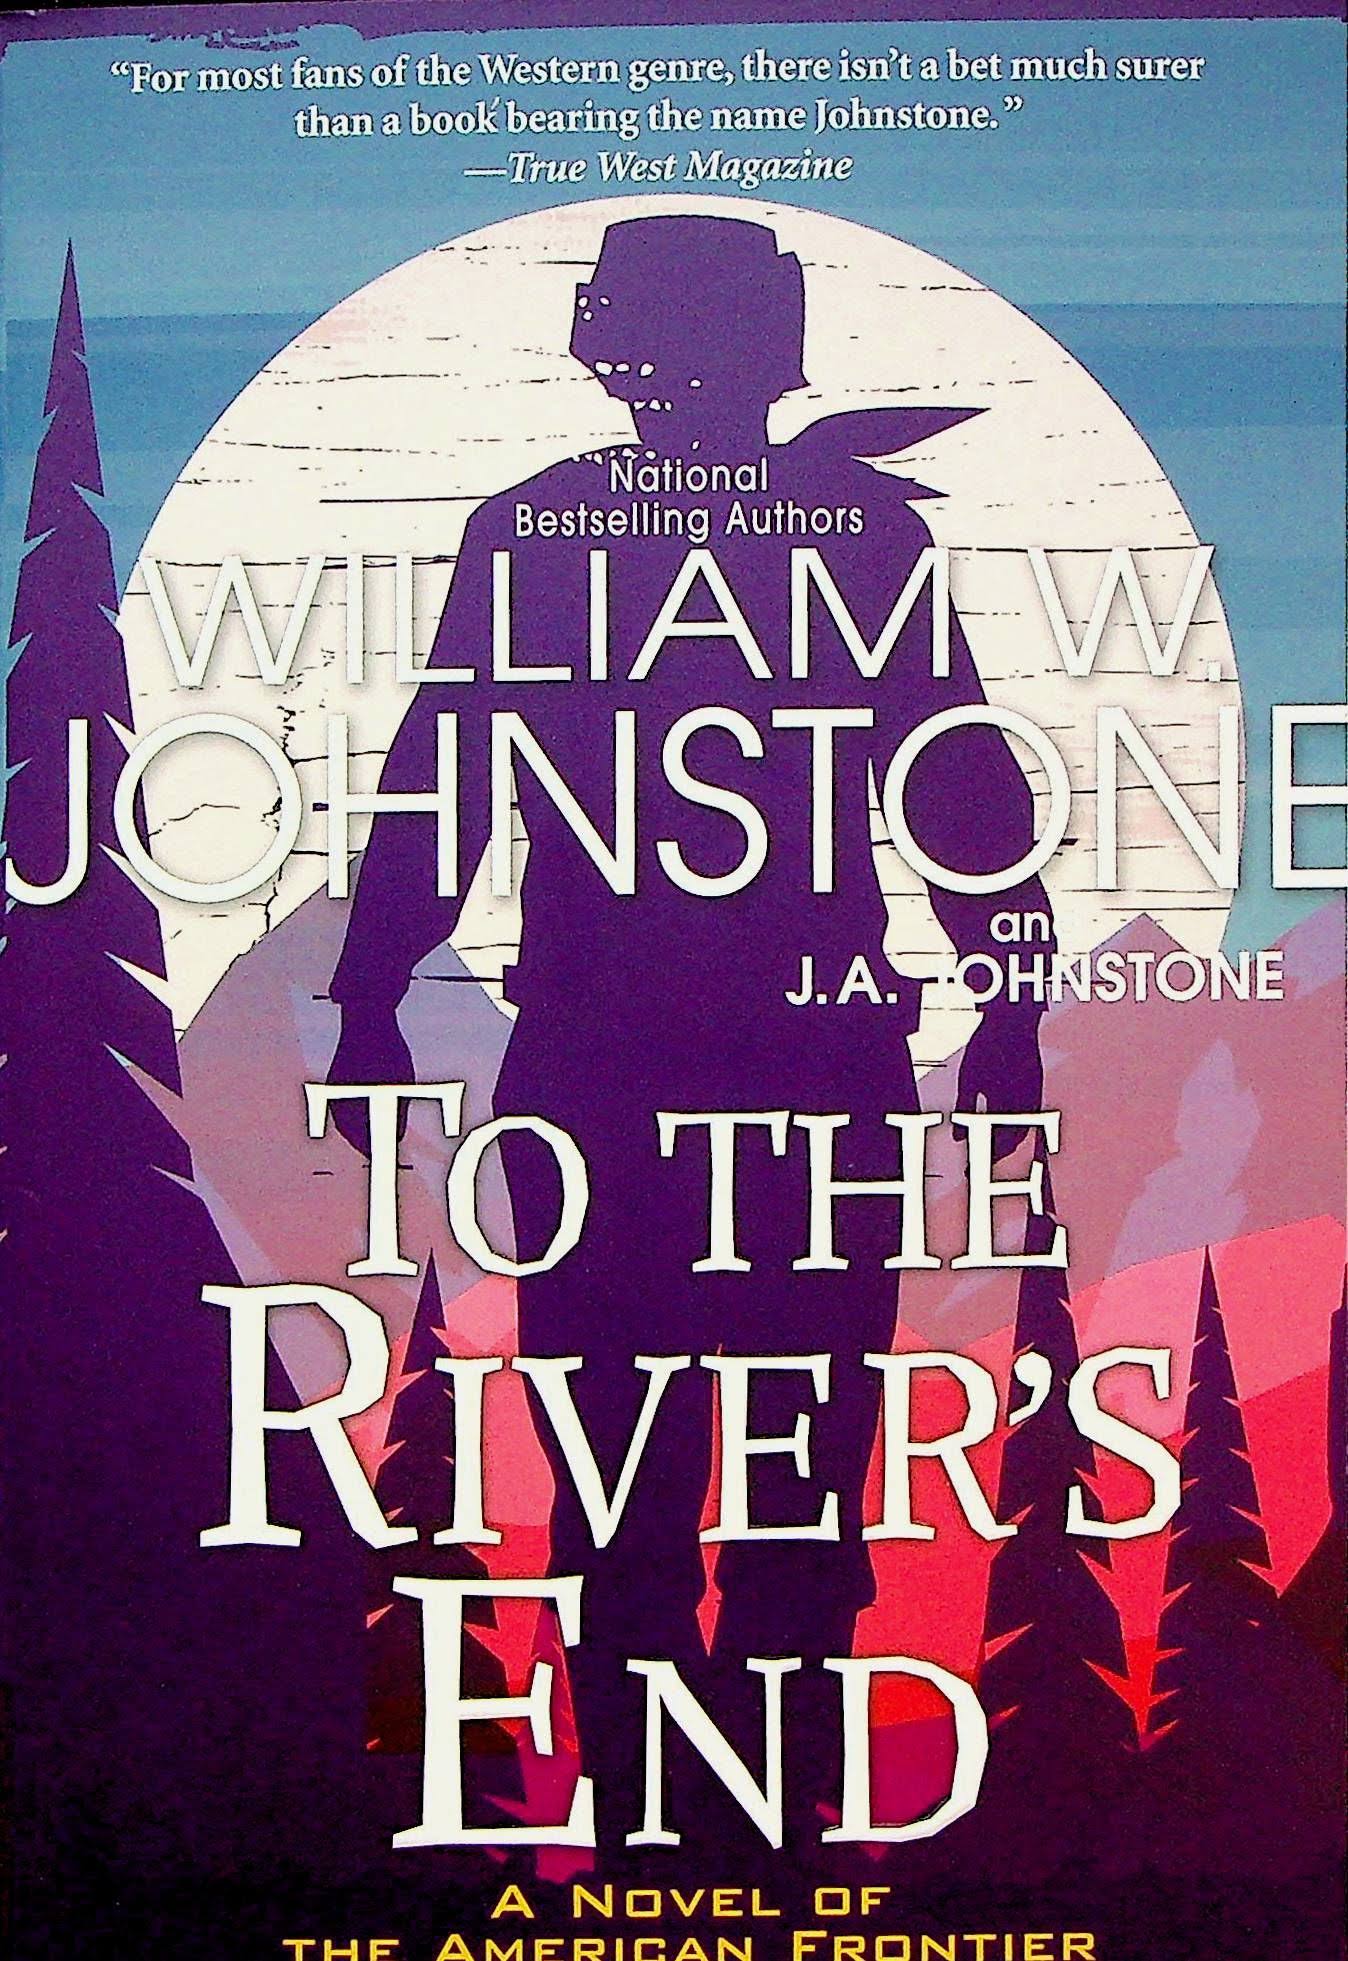 to The River's End by William W. Johnstone